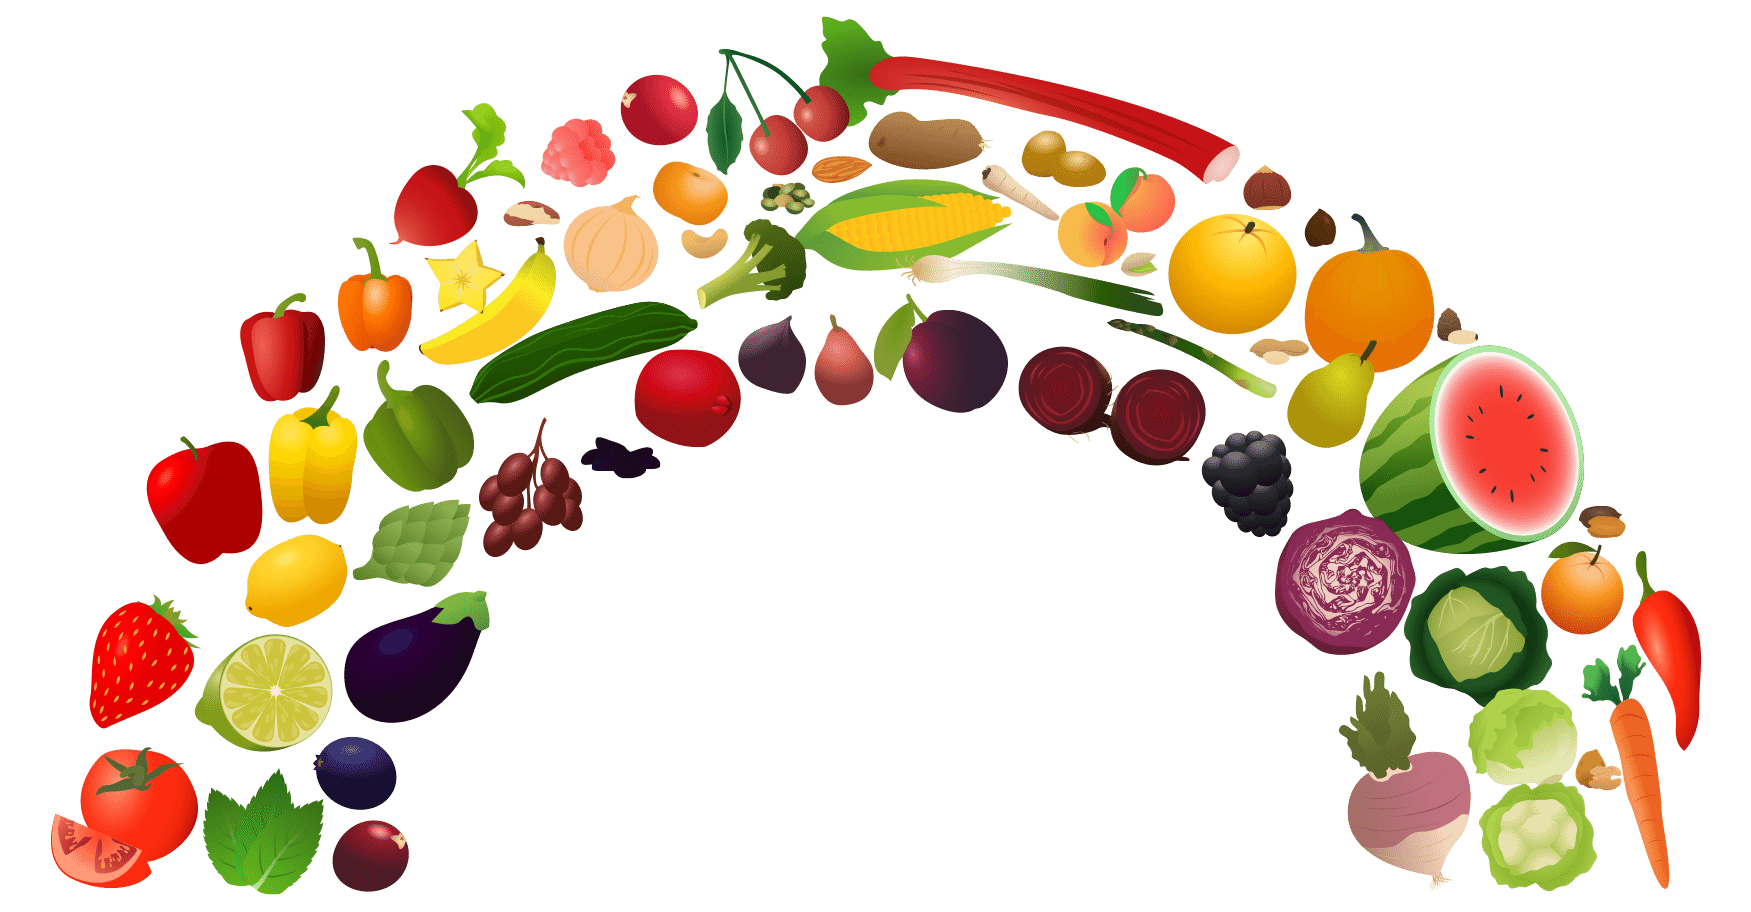 Rainbow Food Vegetable Png Transparent Background Free Download 2965 Freeiconspng